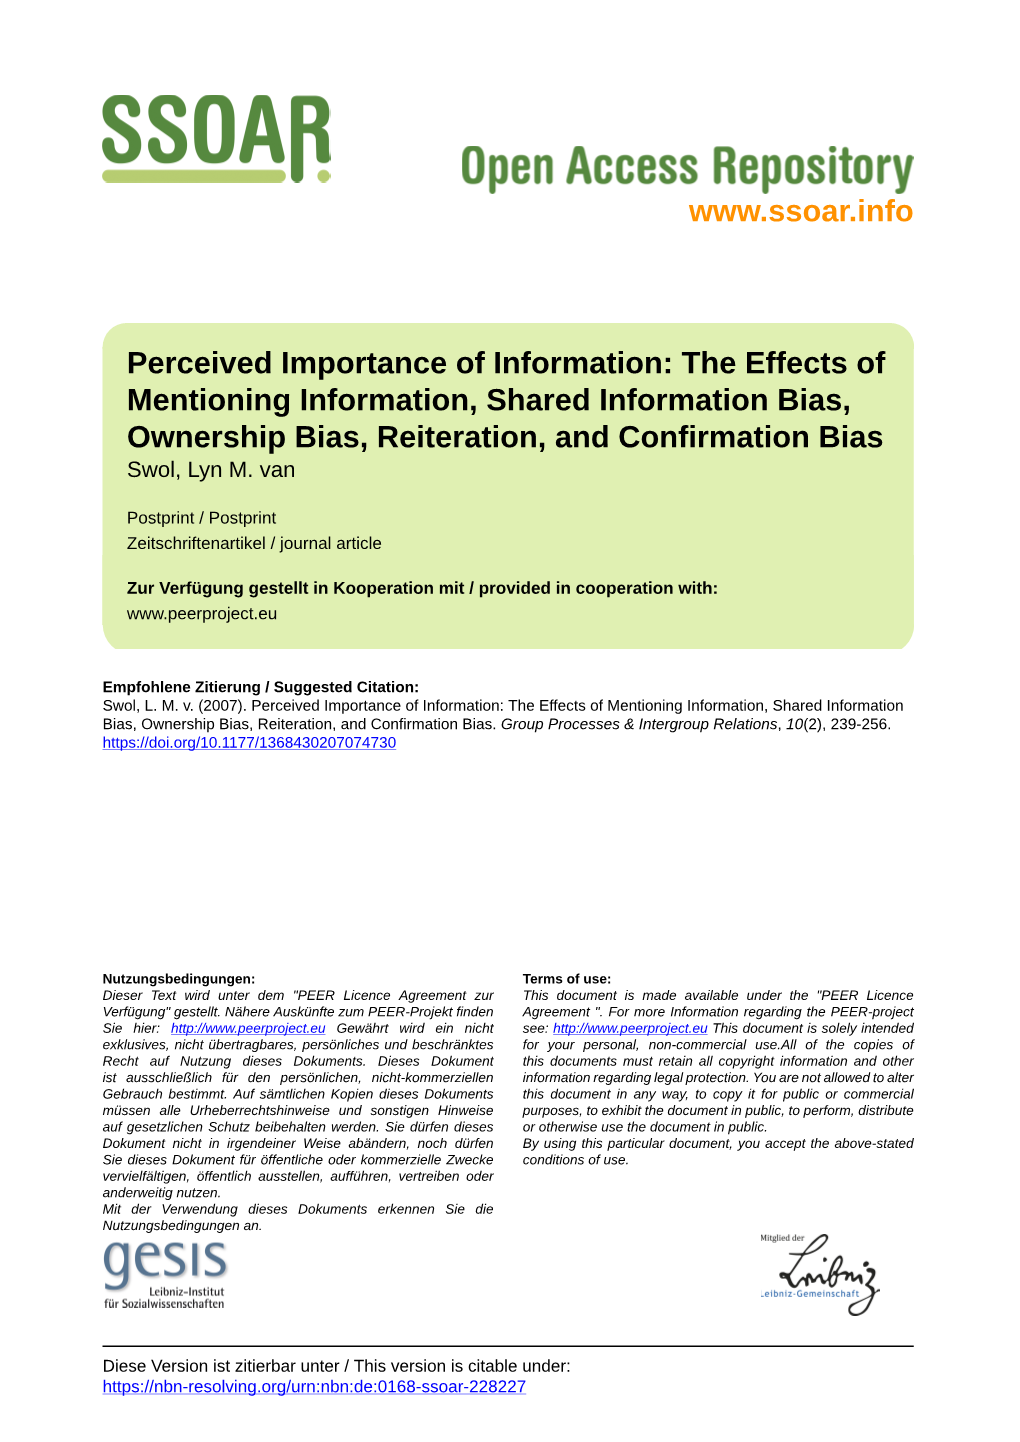 The Effects of Mentioning Information, Shared Information Bias, Ownership Bias, Reiteration, and Confirmation Bias Swol, Lyn M